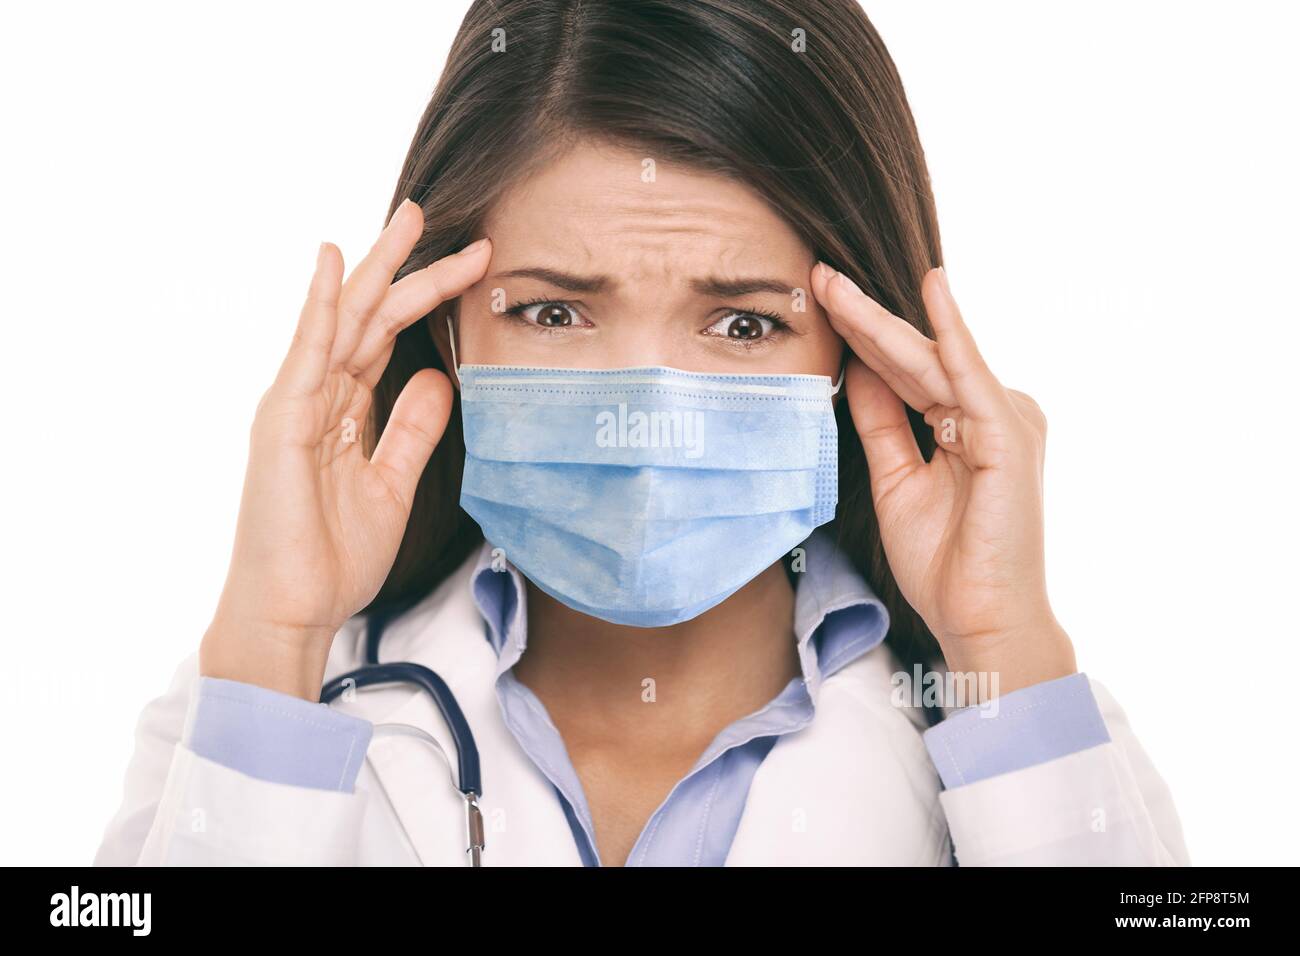 Doctor wearing coronavirus surgical face mask in panic scared doing a funny stressed out facial expression holding head from headache. Asian woman Stock Photo